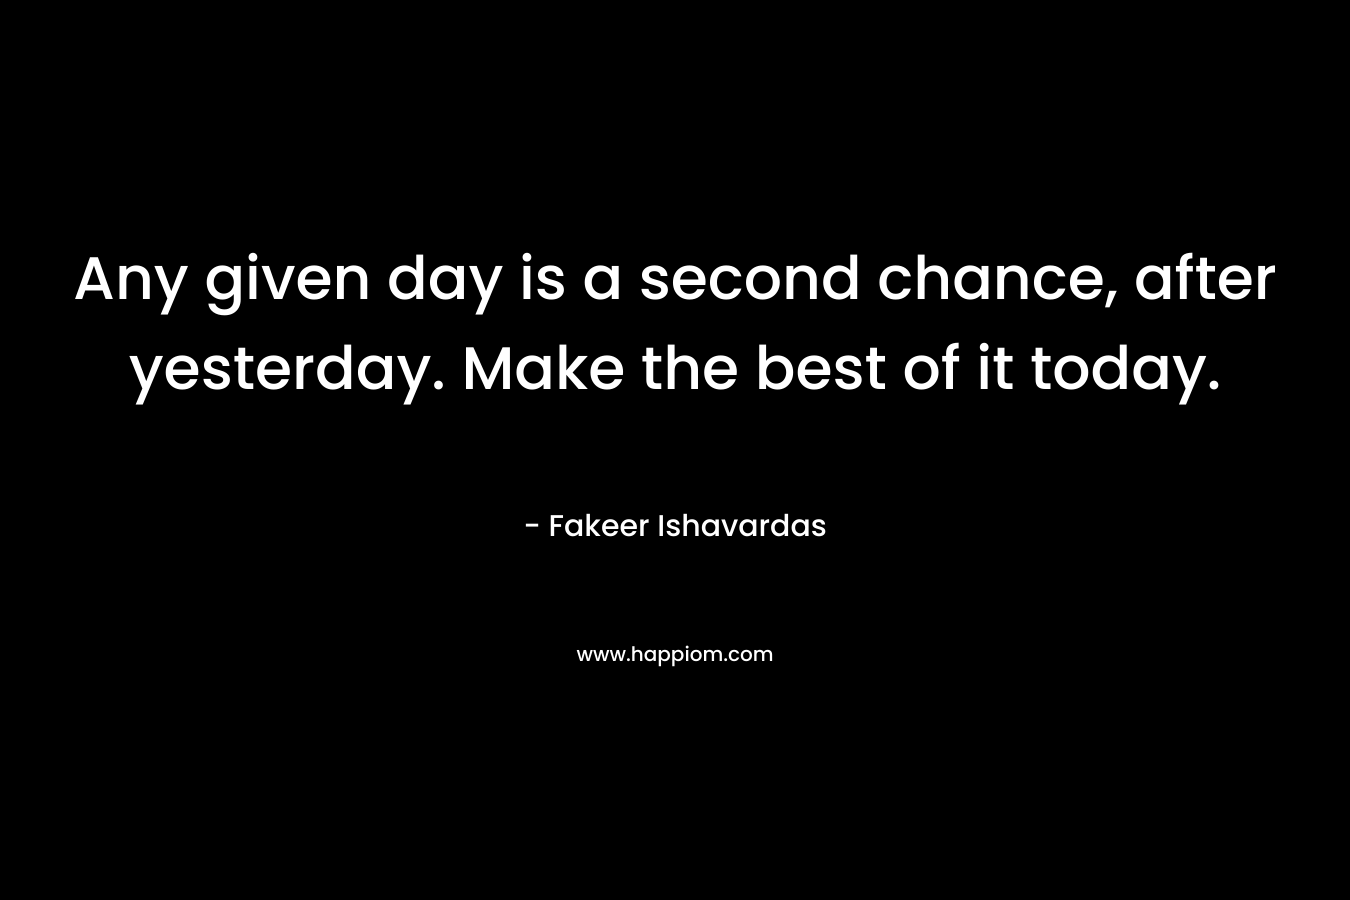 Any given day is a second chance, after yesterday. Make the best of it today.